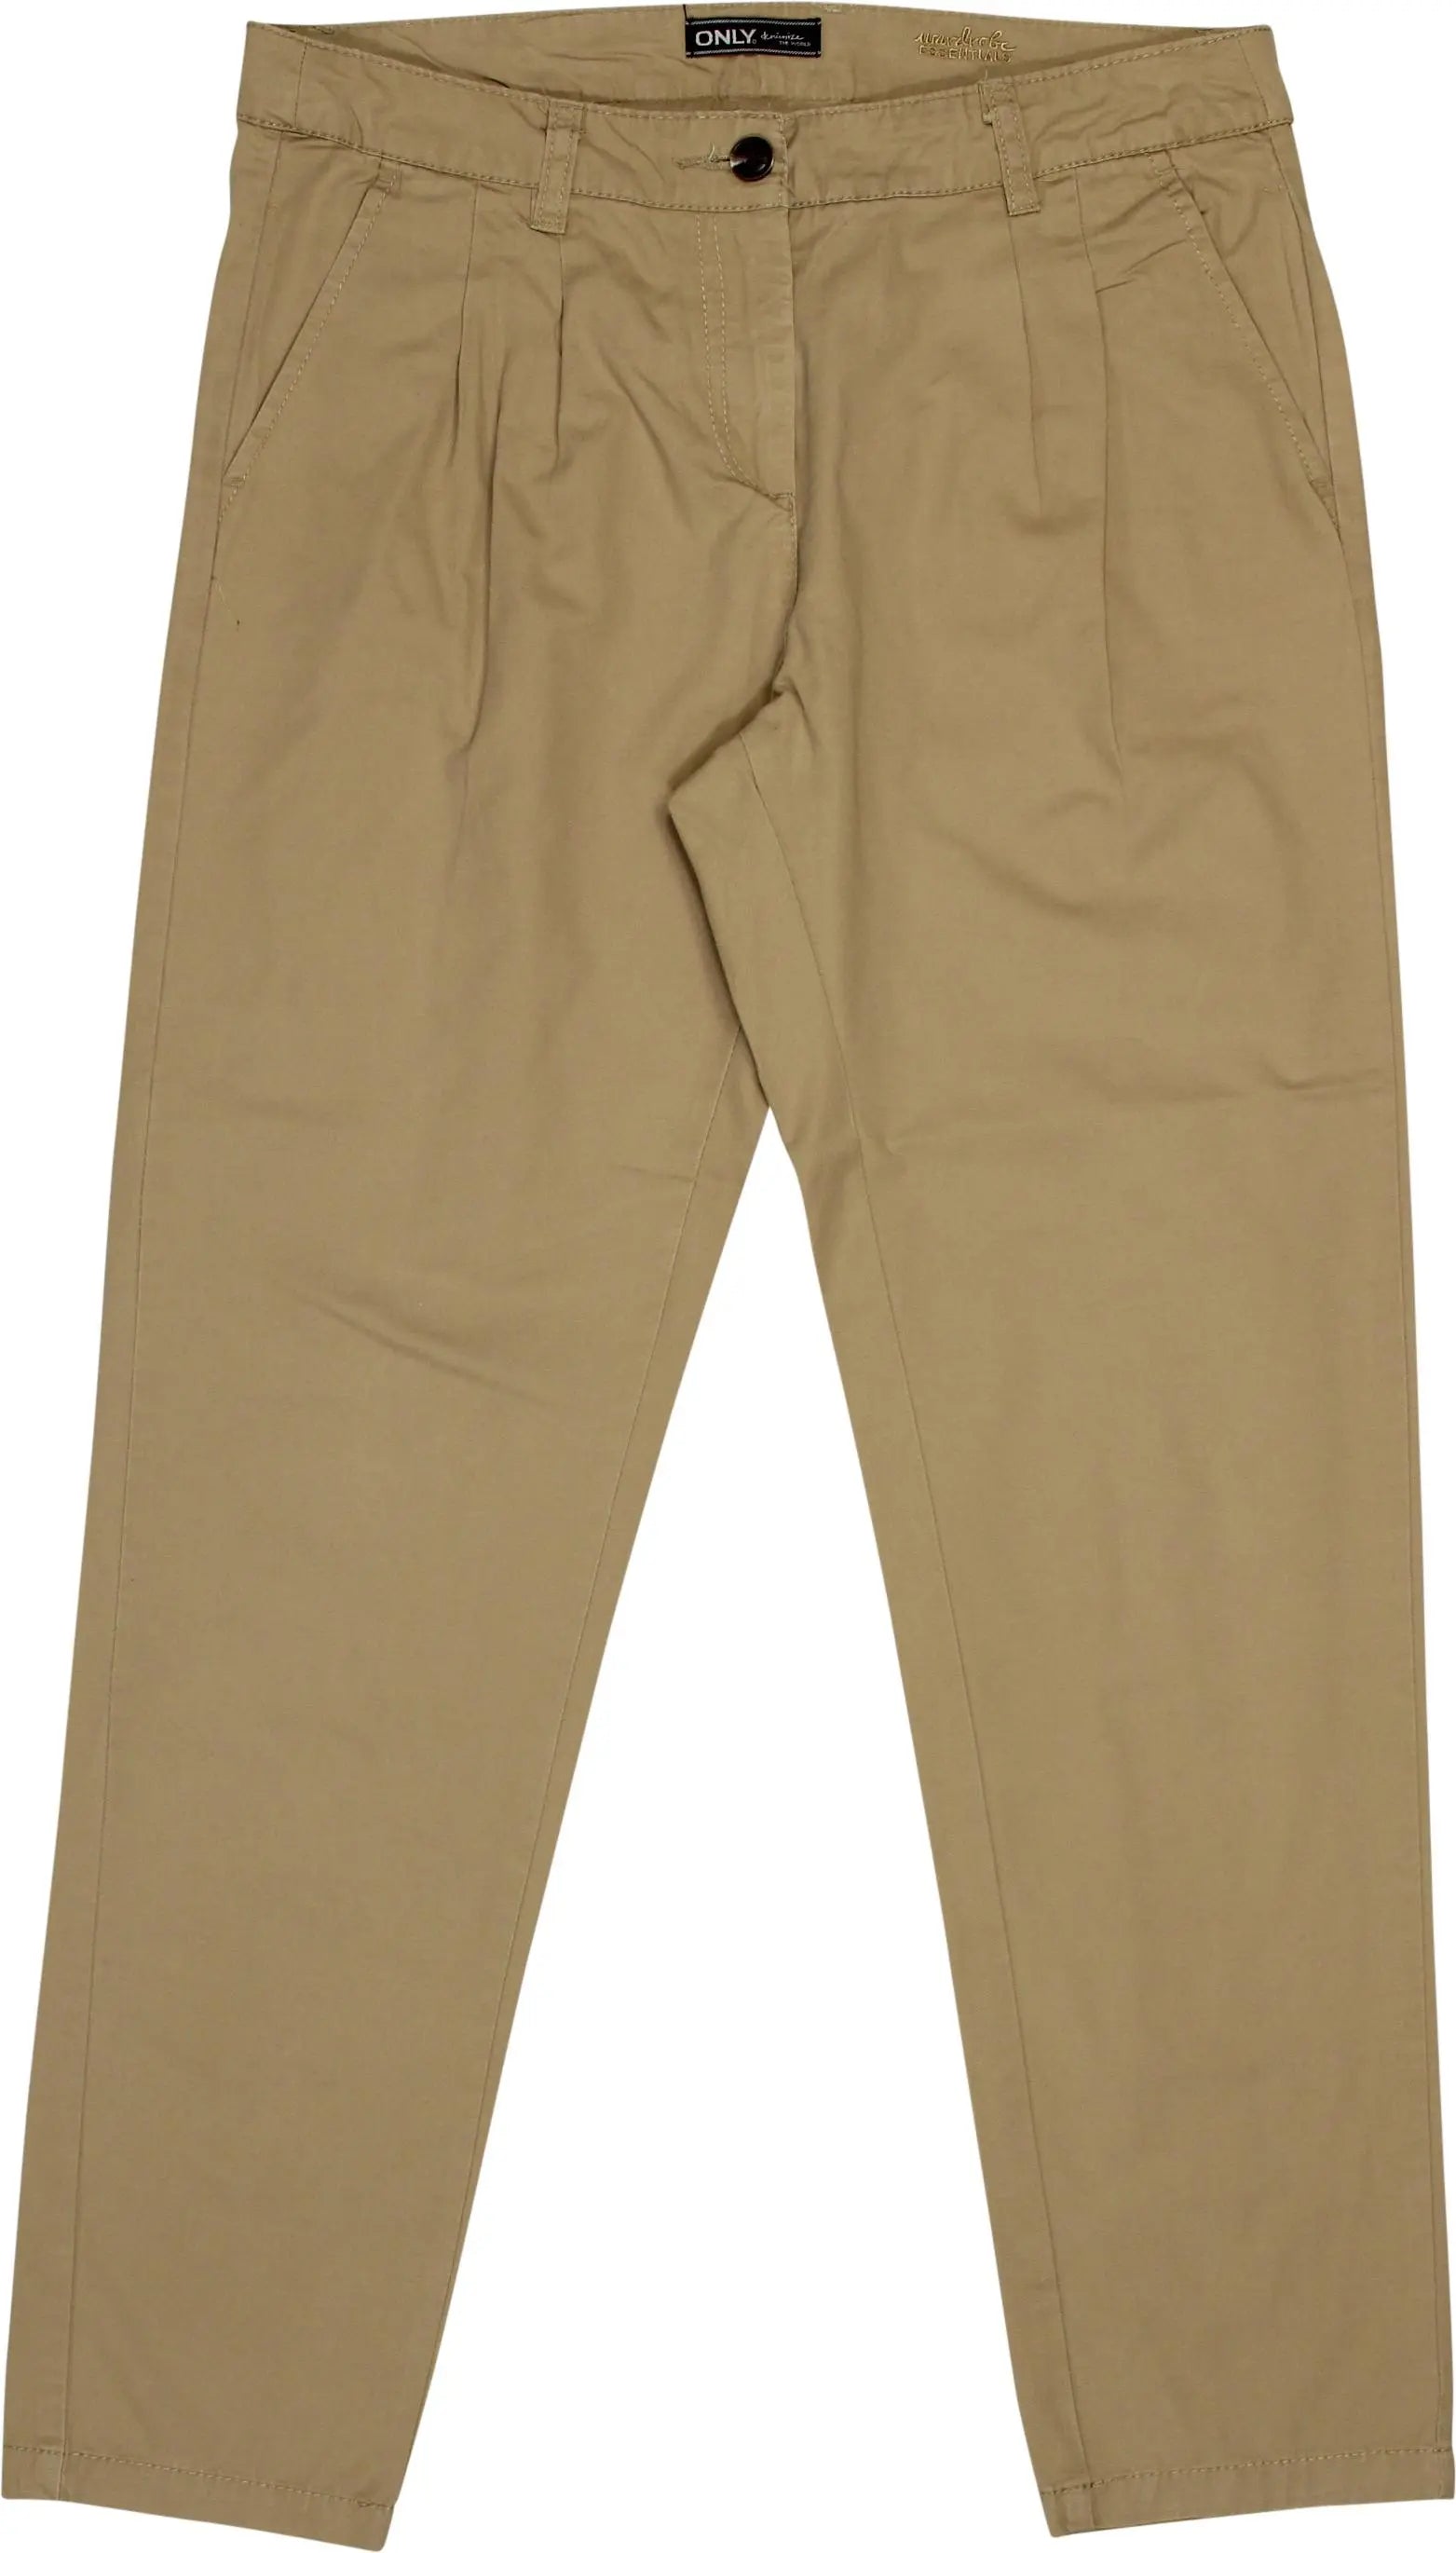 Only - Beige Chino- ThriftTale.com - Vintage and second handclothing